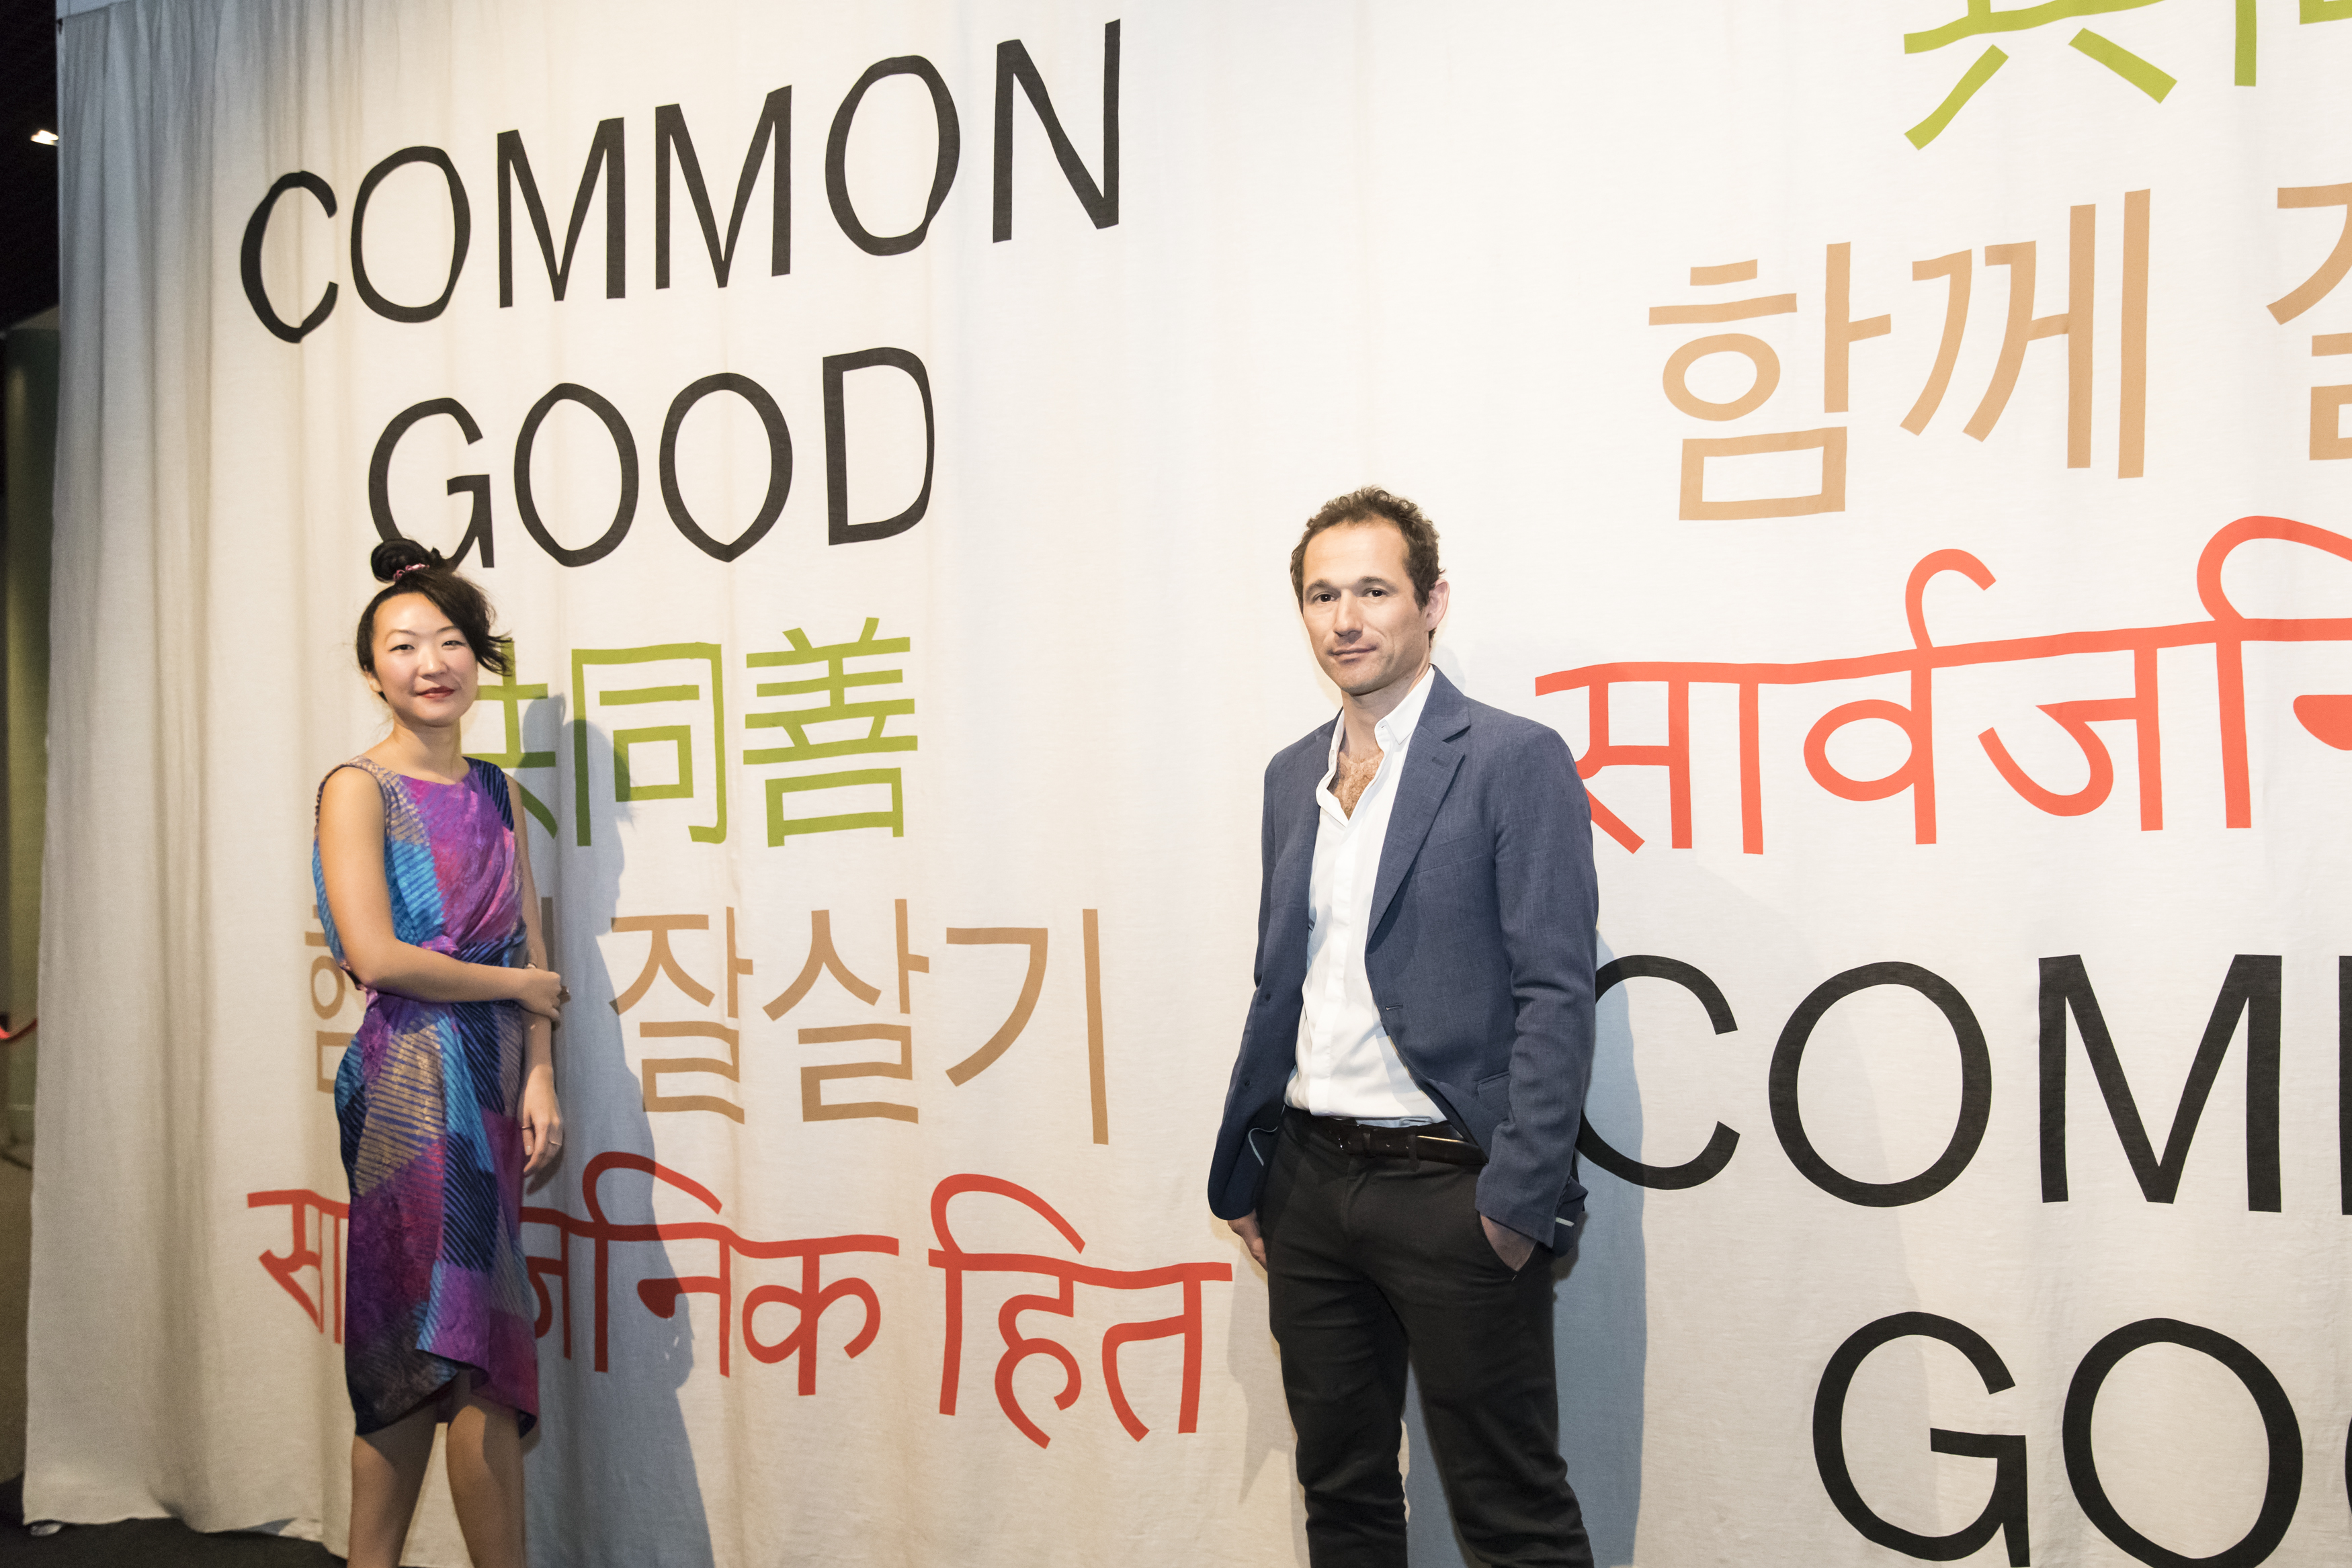 Man and woman posing in front of a curtain with Common Good written on it in various languages. 